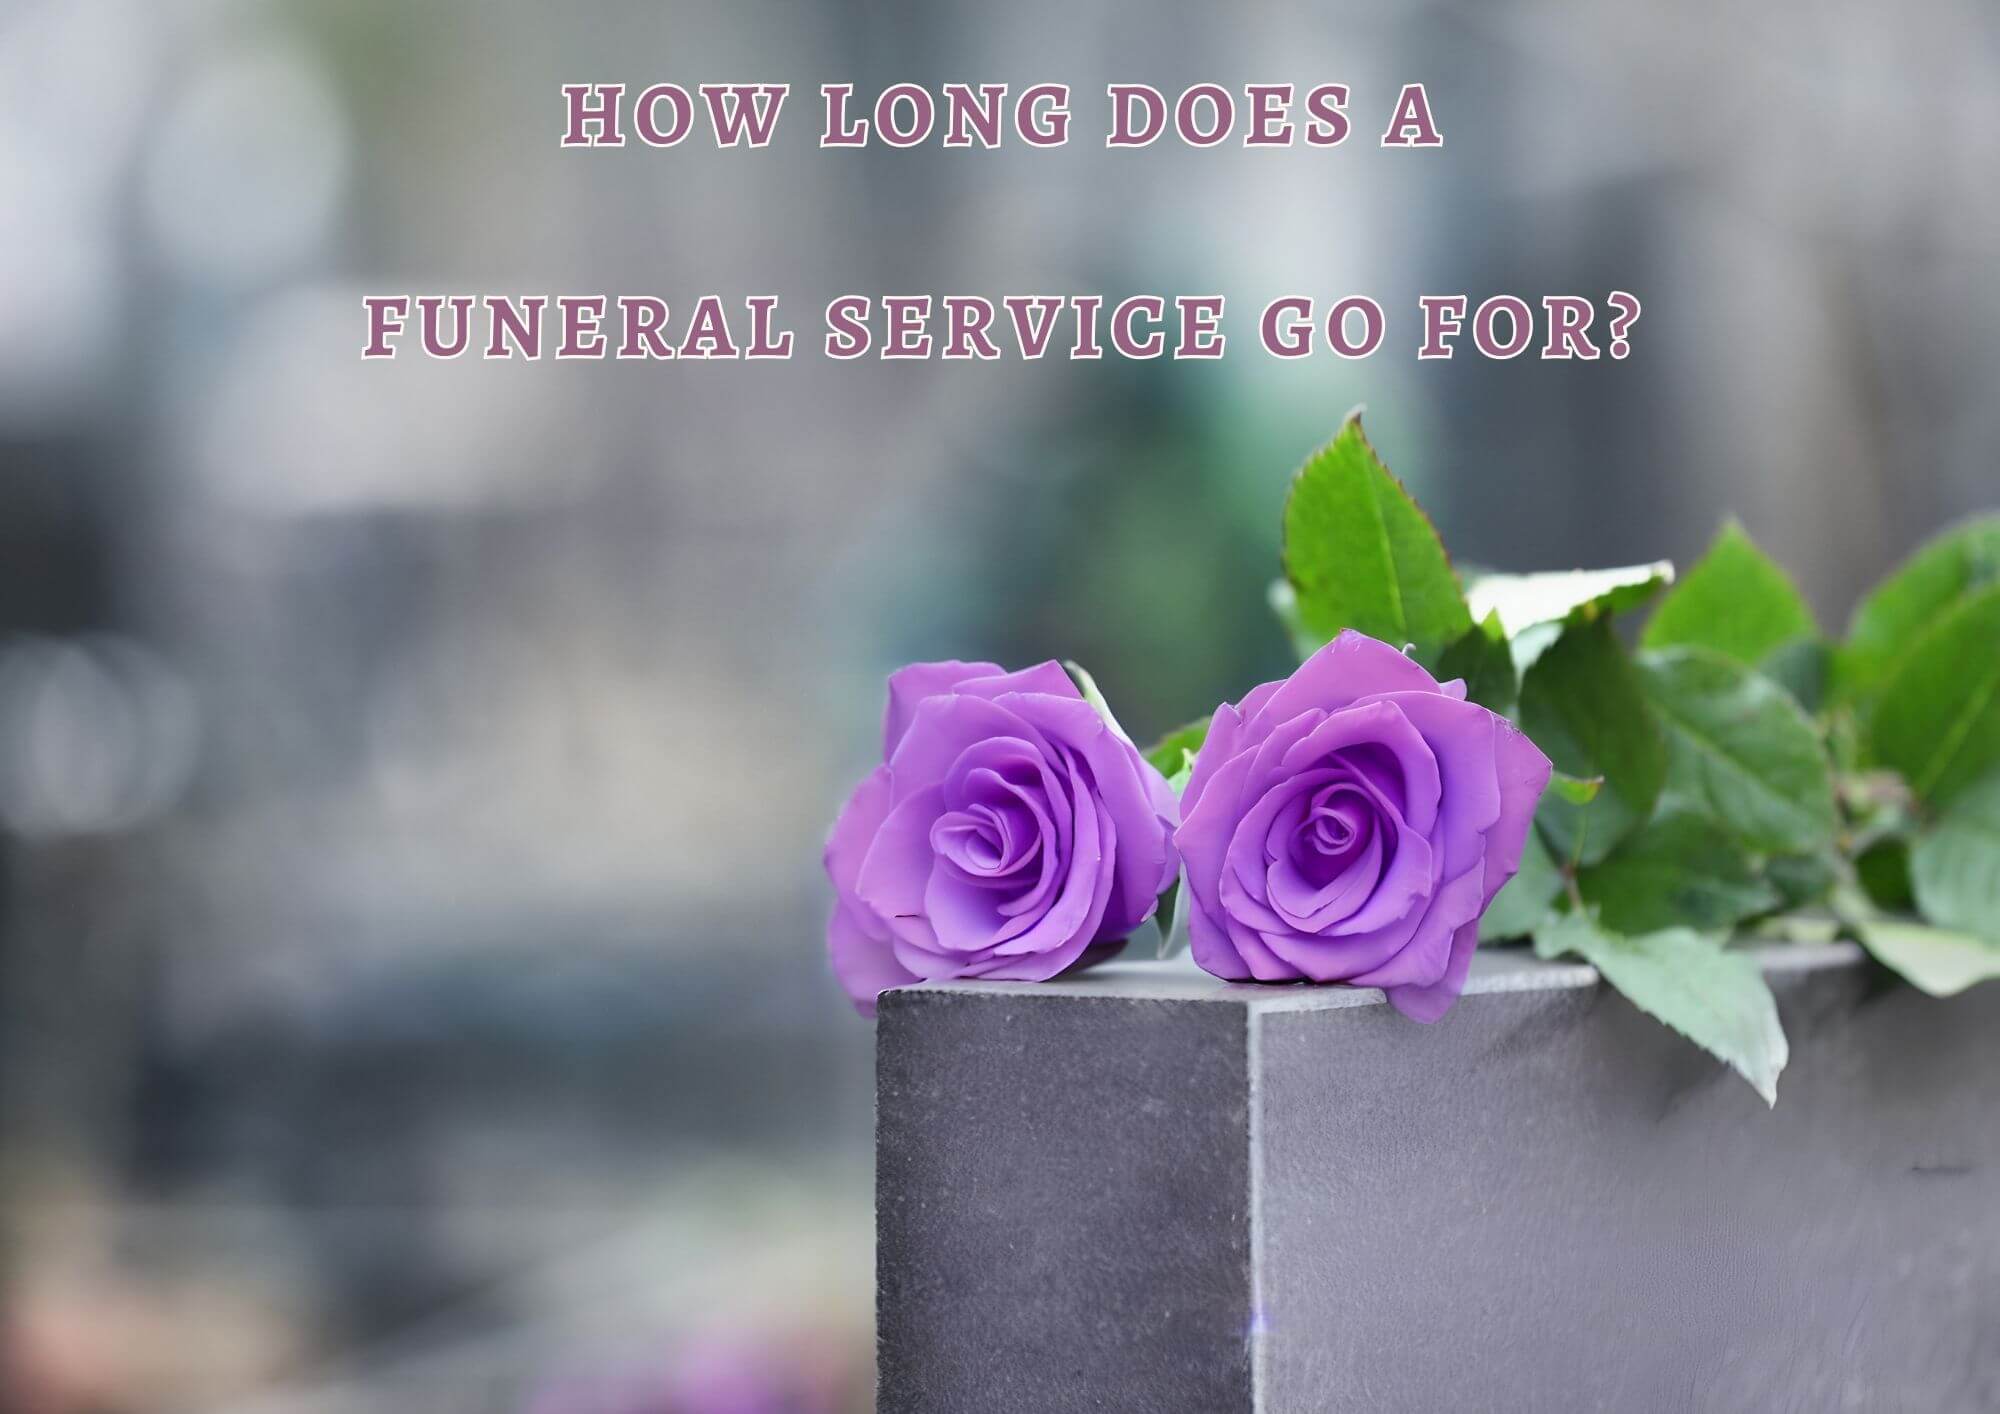 How long does a funeral go for?